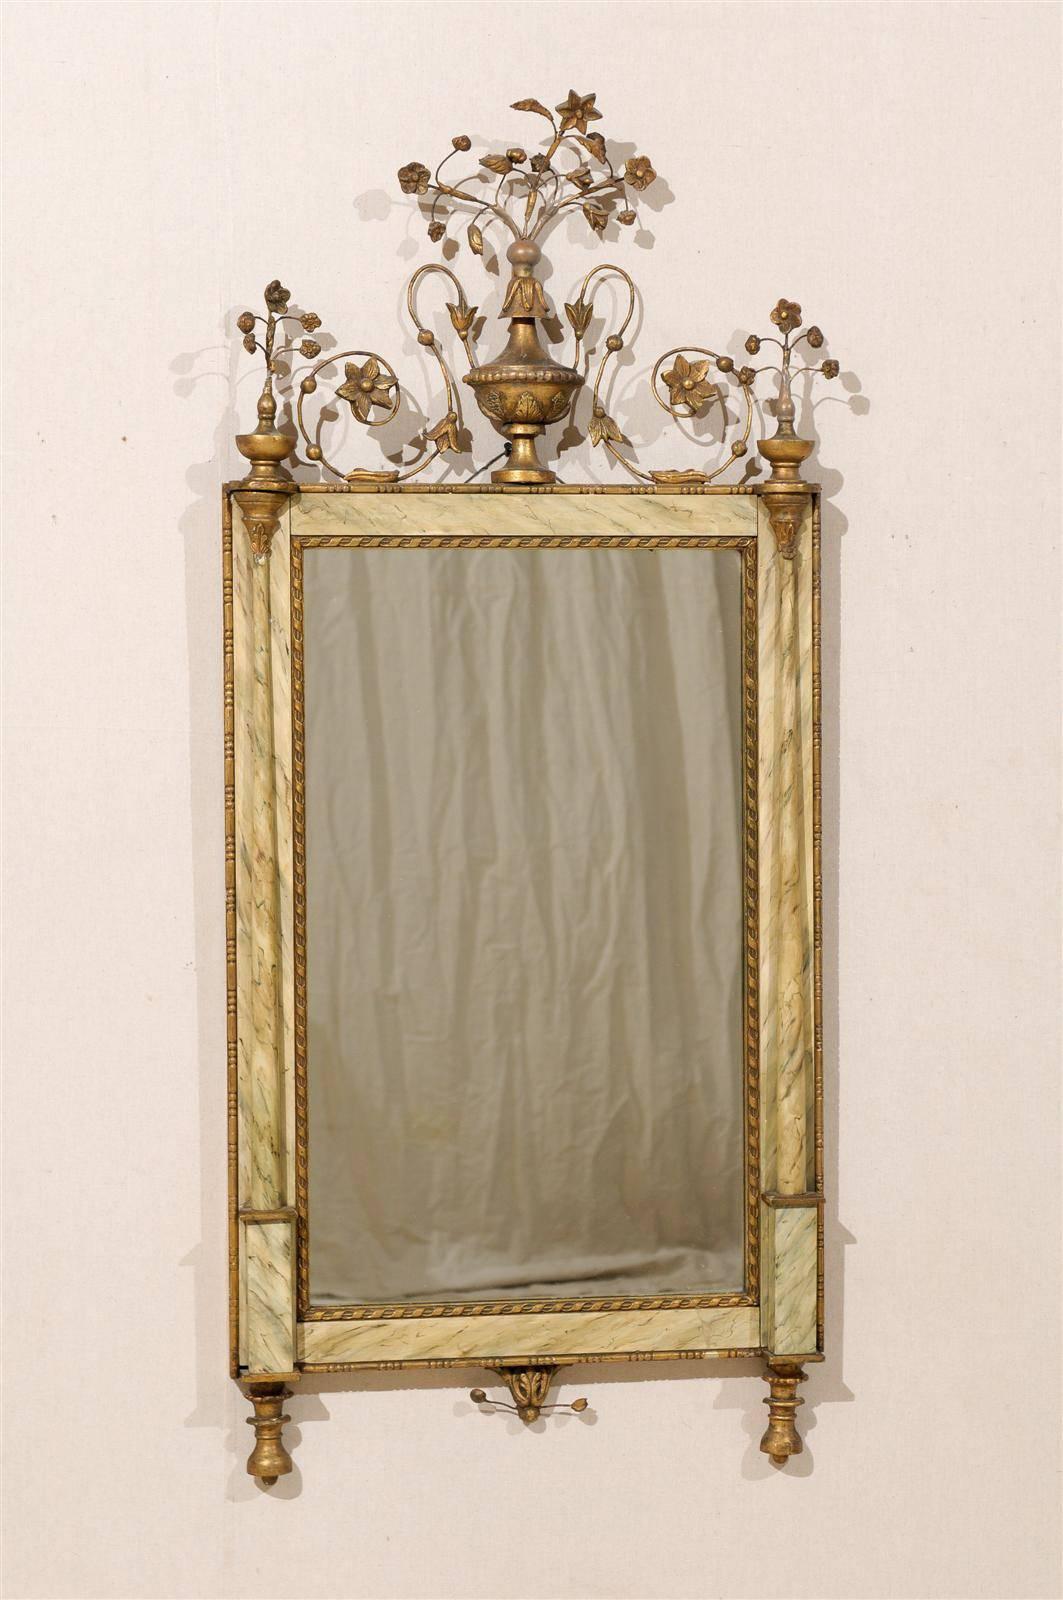 An exquisite mid-20th century, Italian rectangular wall mirror with faux marble frame. This mirror is flanked with two slender columns in the surround. This Italian mirror also has delicately carved and gilded rinceaux accents. This piece would look